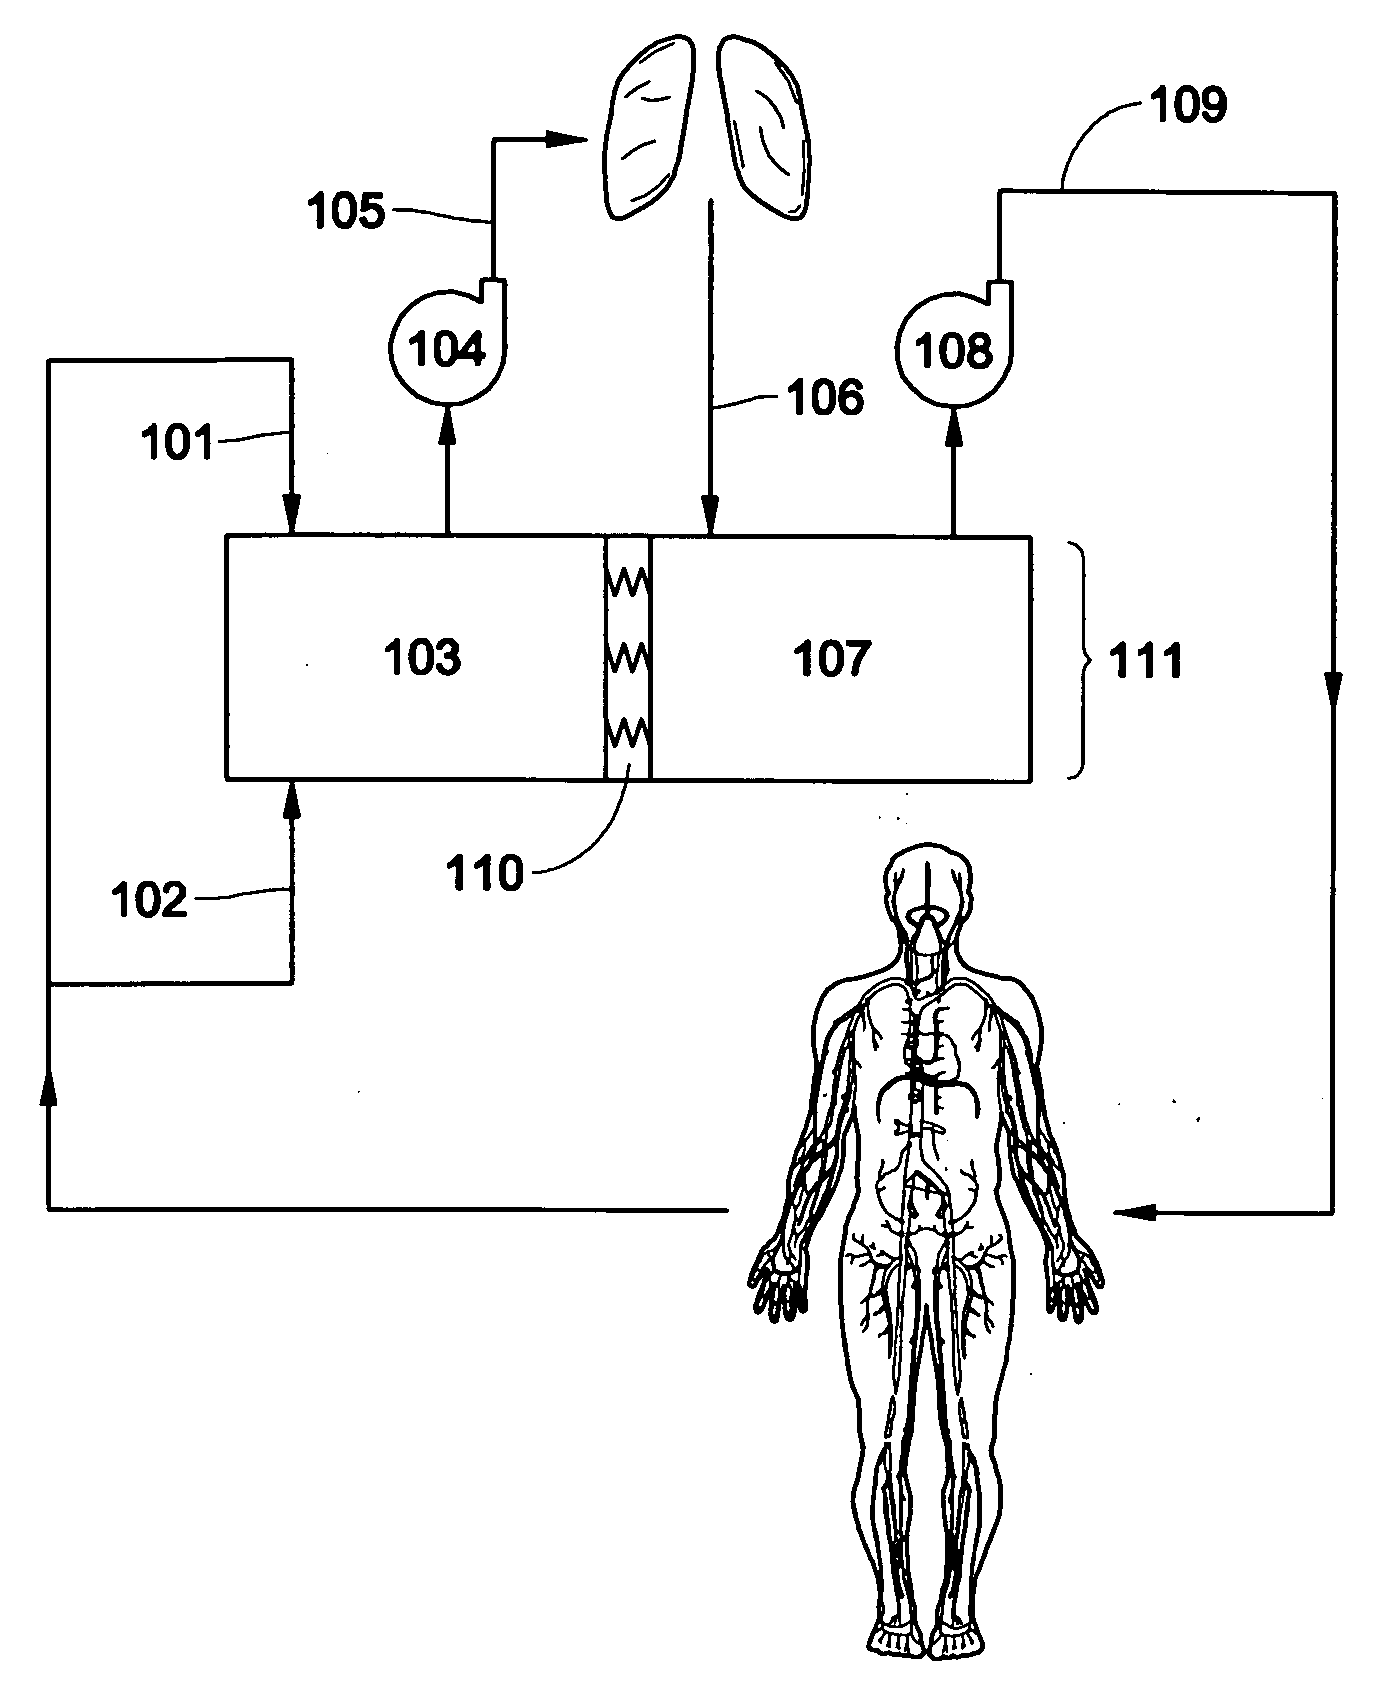 Total artificial heart system for auto-regulating flow and pressure balance